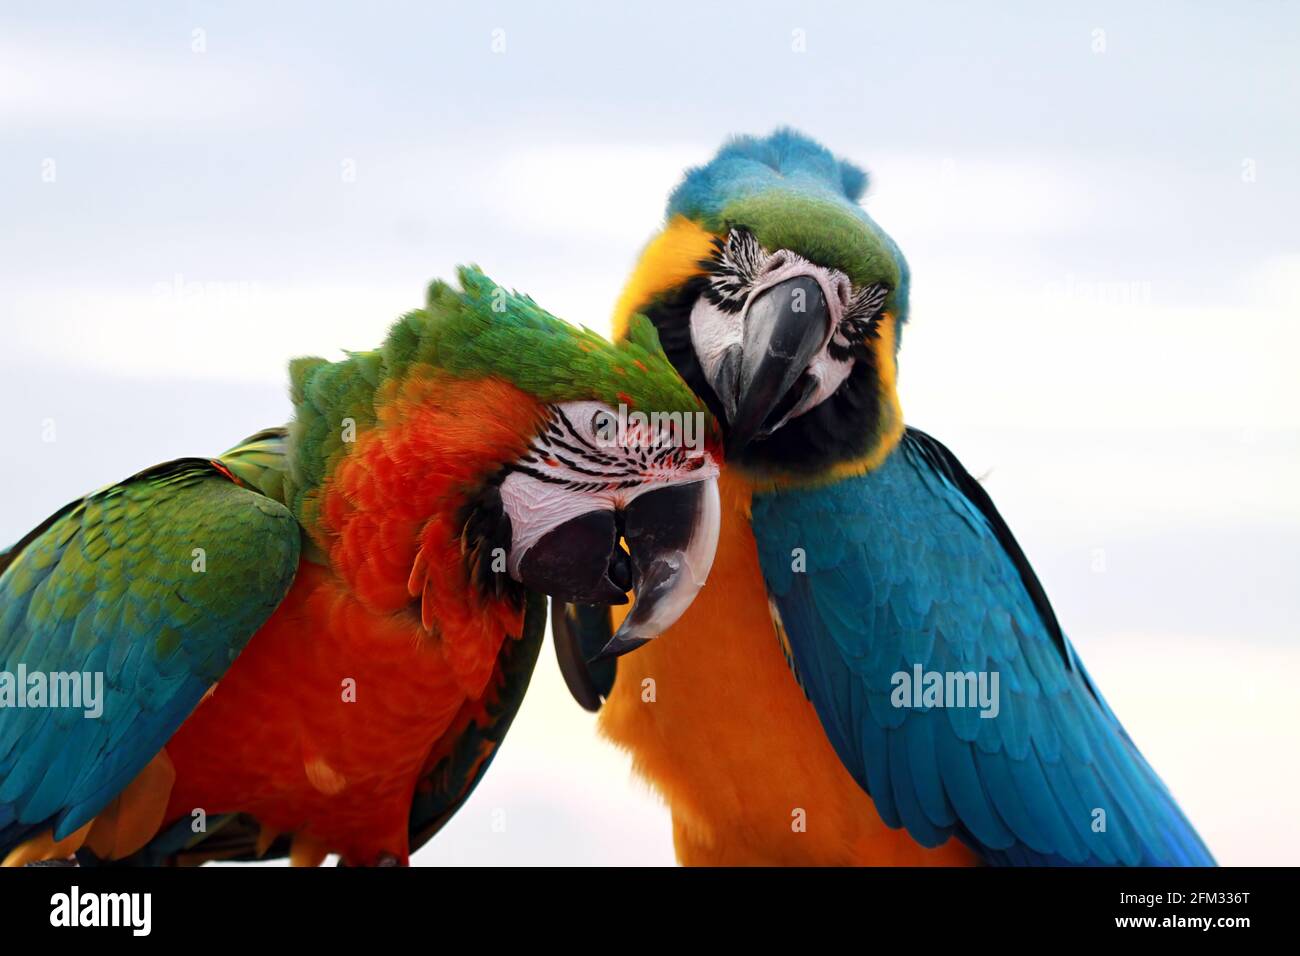 Portrait of two Scarlet Macaw birds on a branch, Indonesia Stock Photo